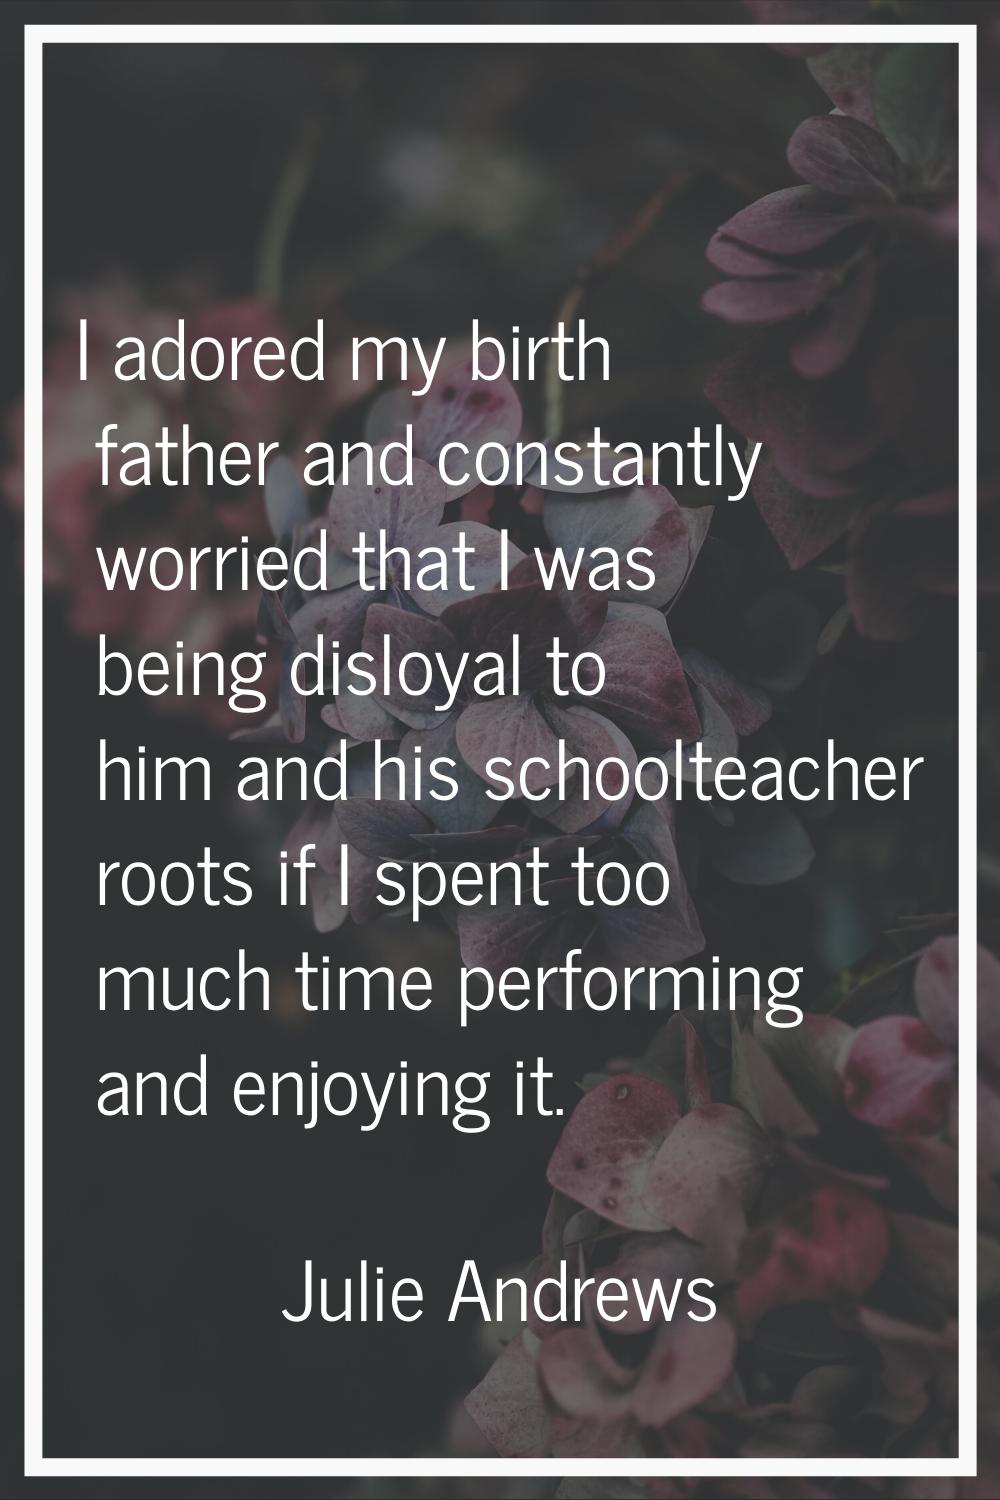 I adored my birth father and constantly worried that I was being disloyal to him and his schoolteac